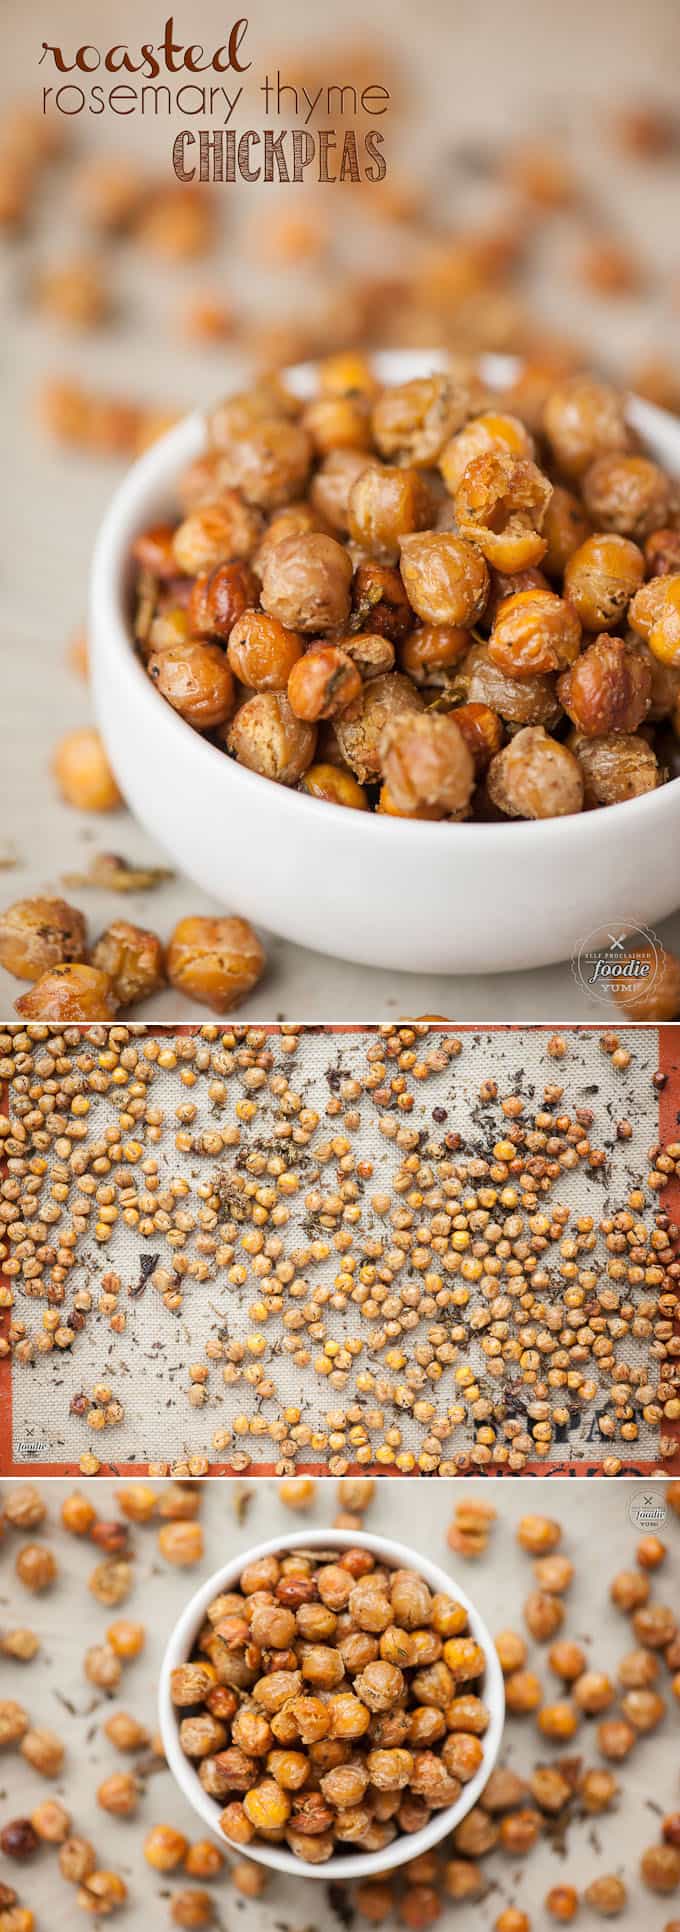 If you are looking for a tasty snack packed full of nutritional benefits, you cannot beat these delicious and high in fiber Roasted Rosemary Thyme Chickpeas.